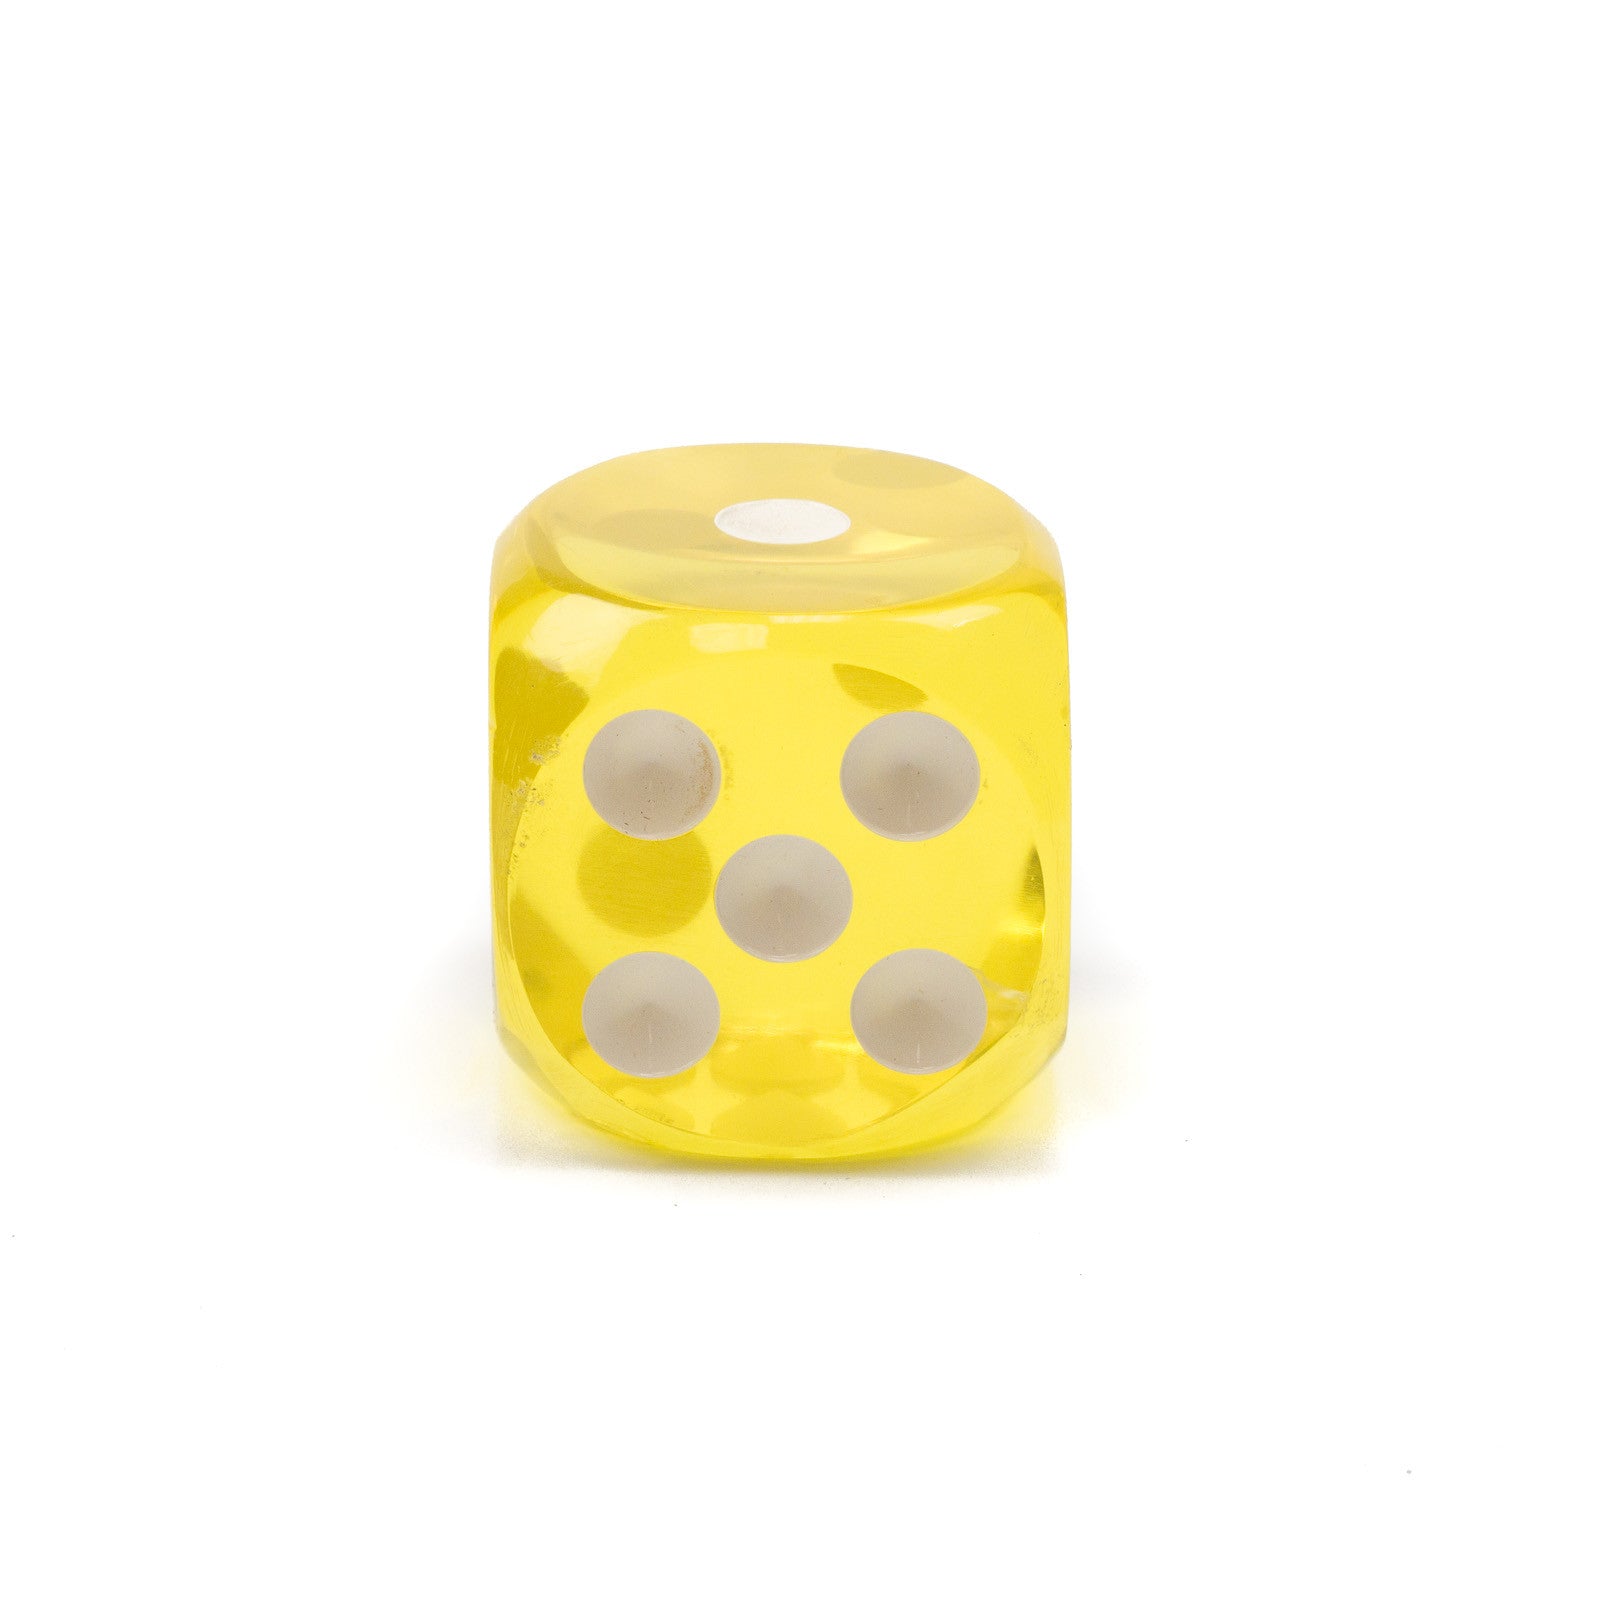 Acrylic Transparent Dice - 50 mm / 2 inch -  Sold Individually - Casino Supply - 2